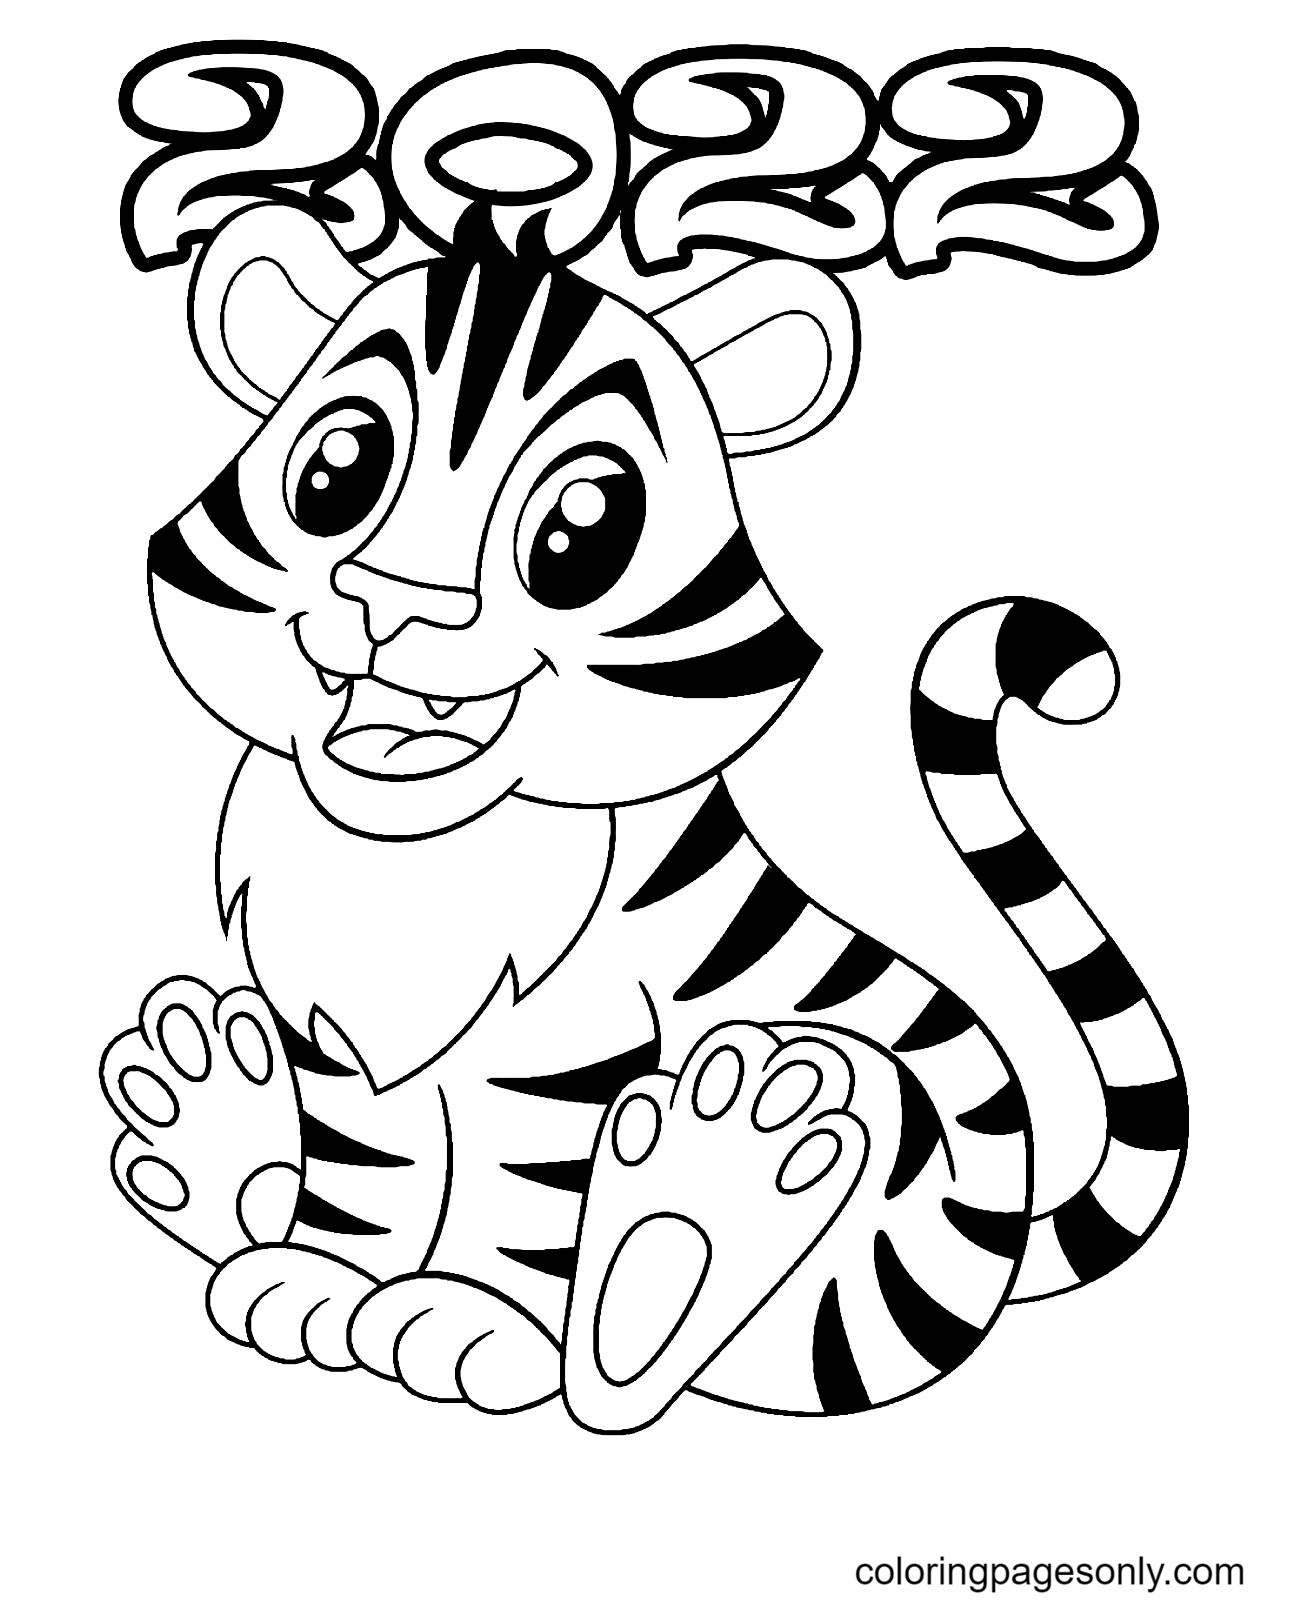 Year 20 Tiger Coloring Pages   Happy New Year 20 Coloring ...